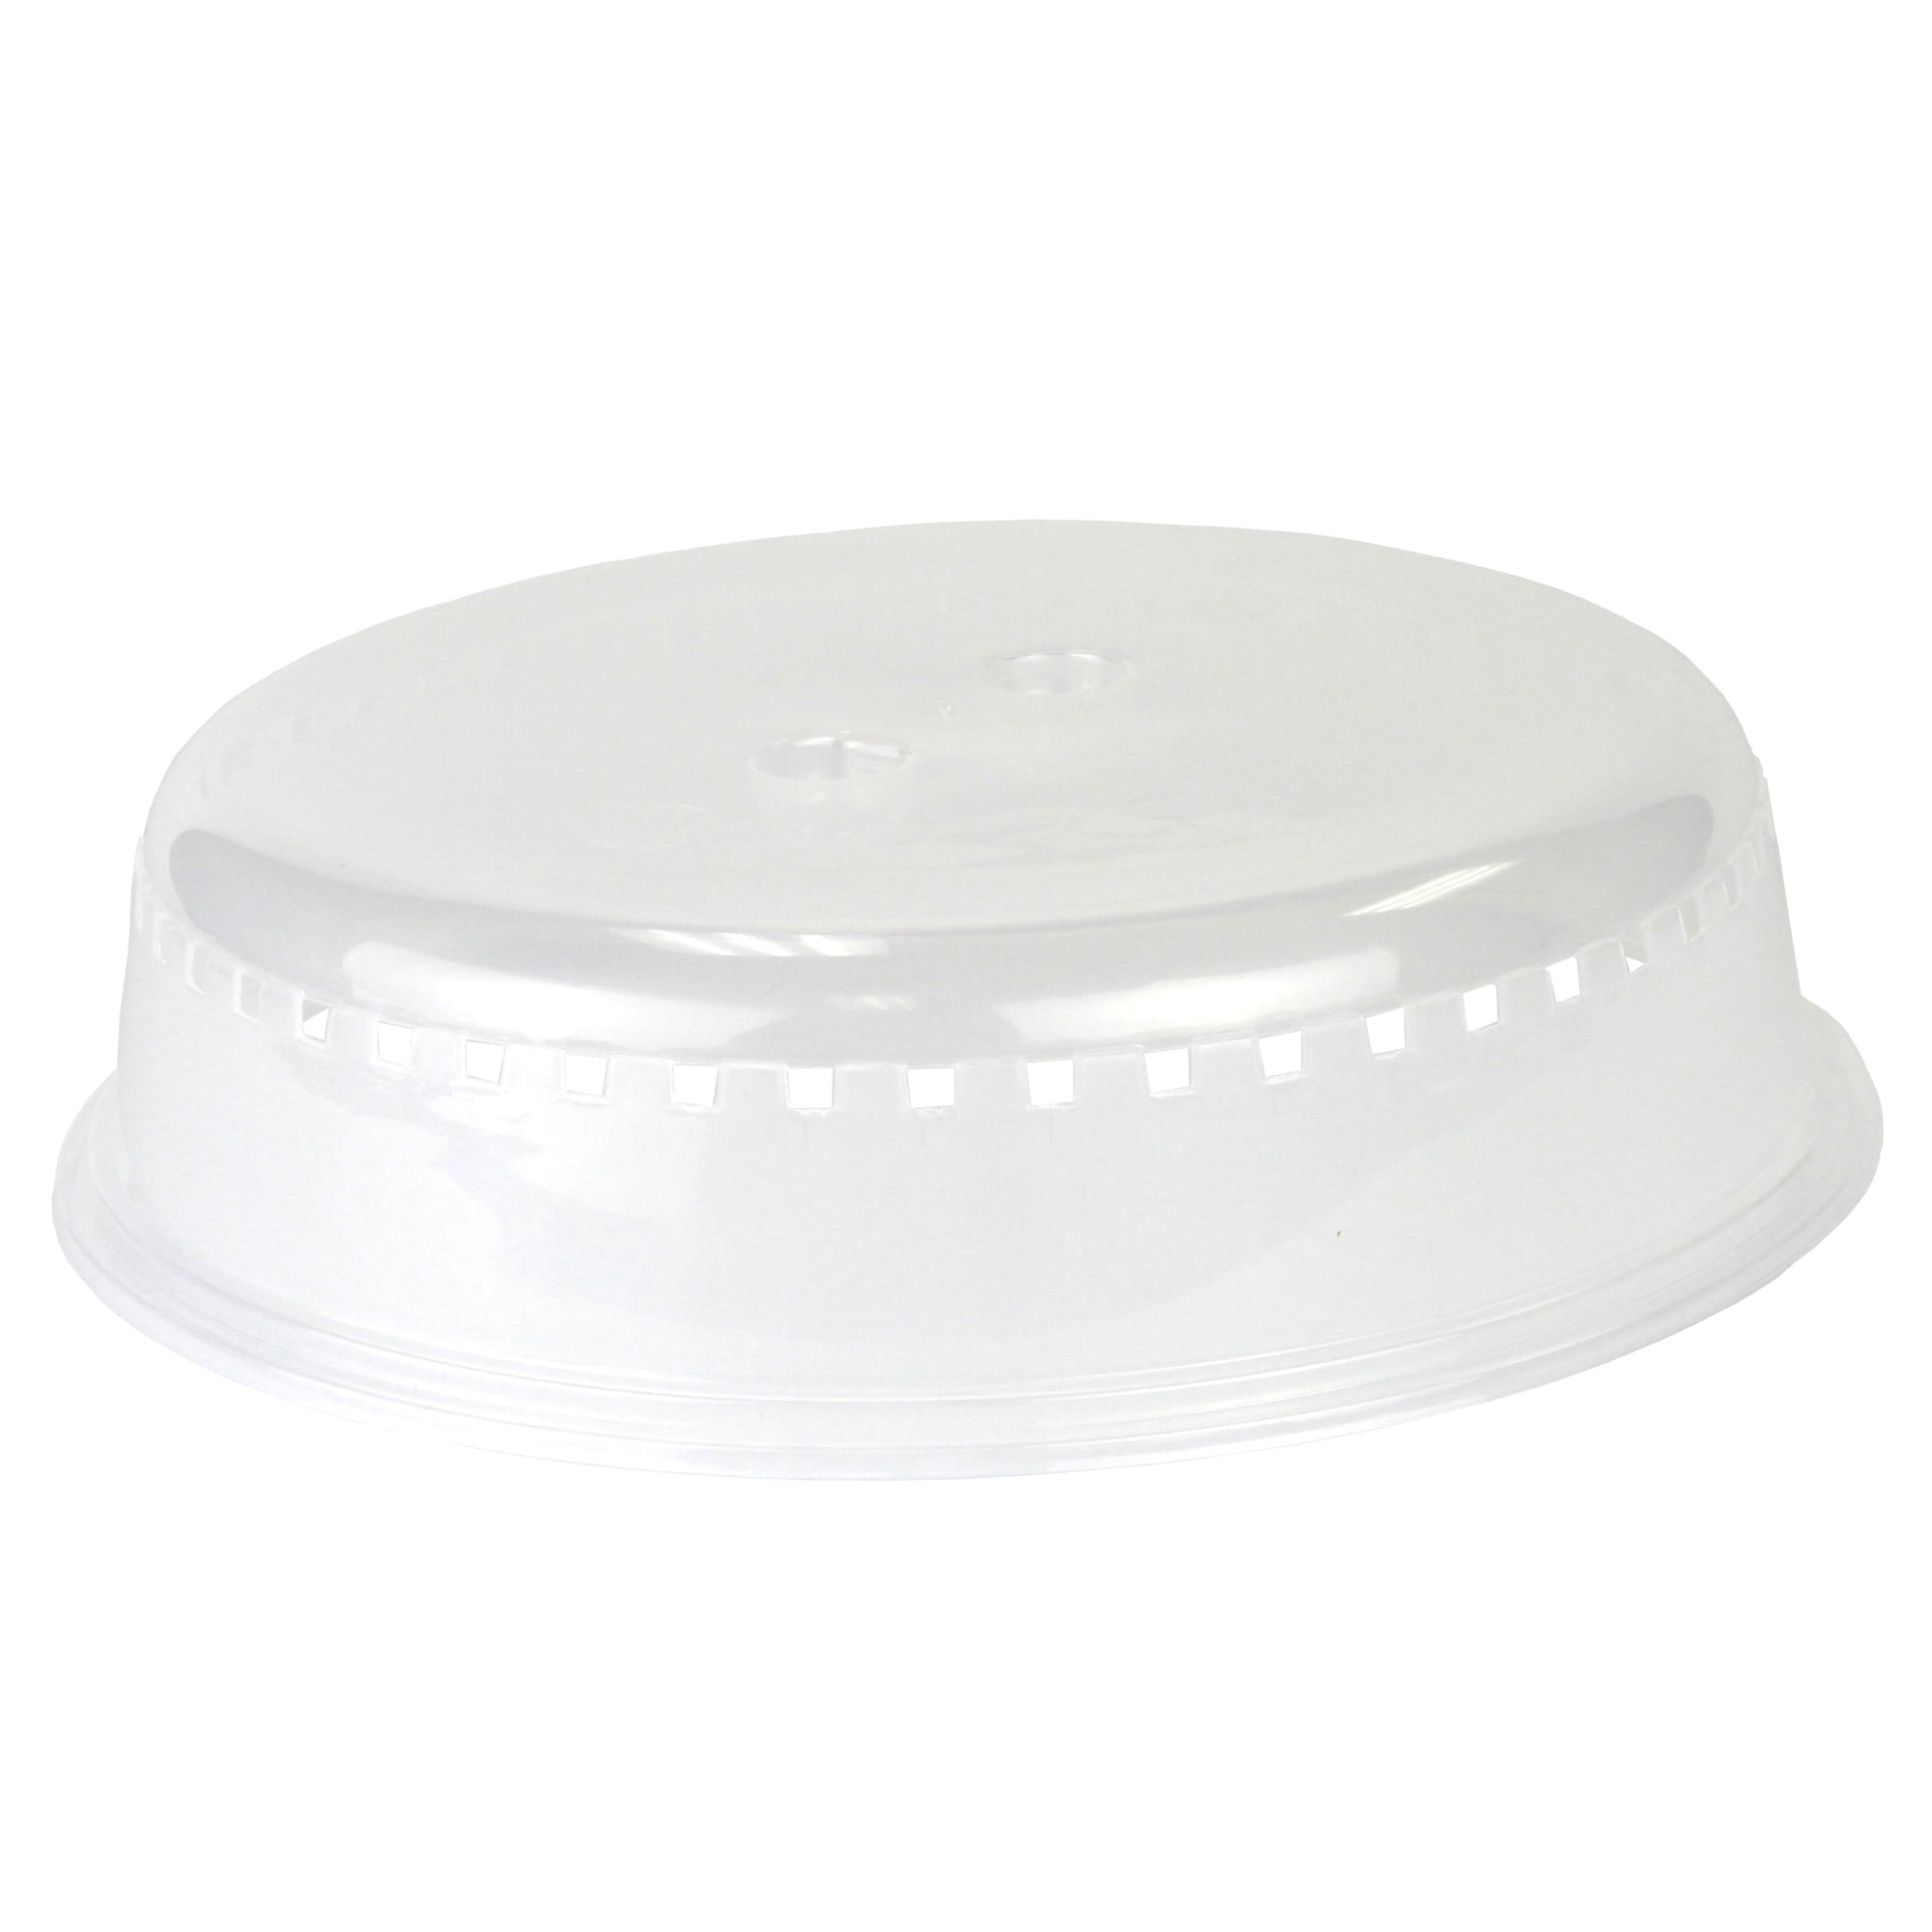 10 MICROWAVE PLATE COVER WITH VENT-48